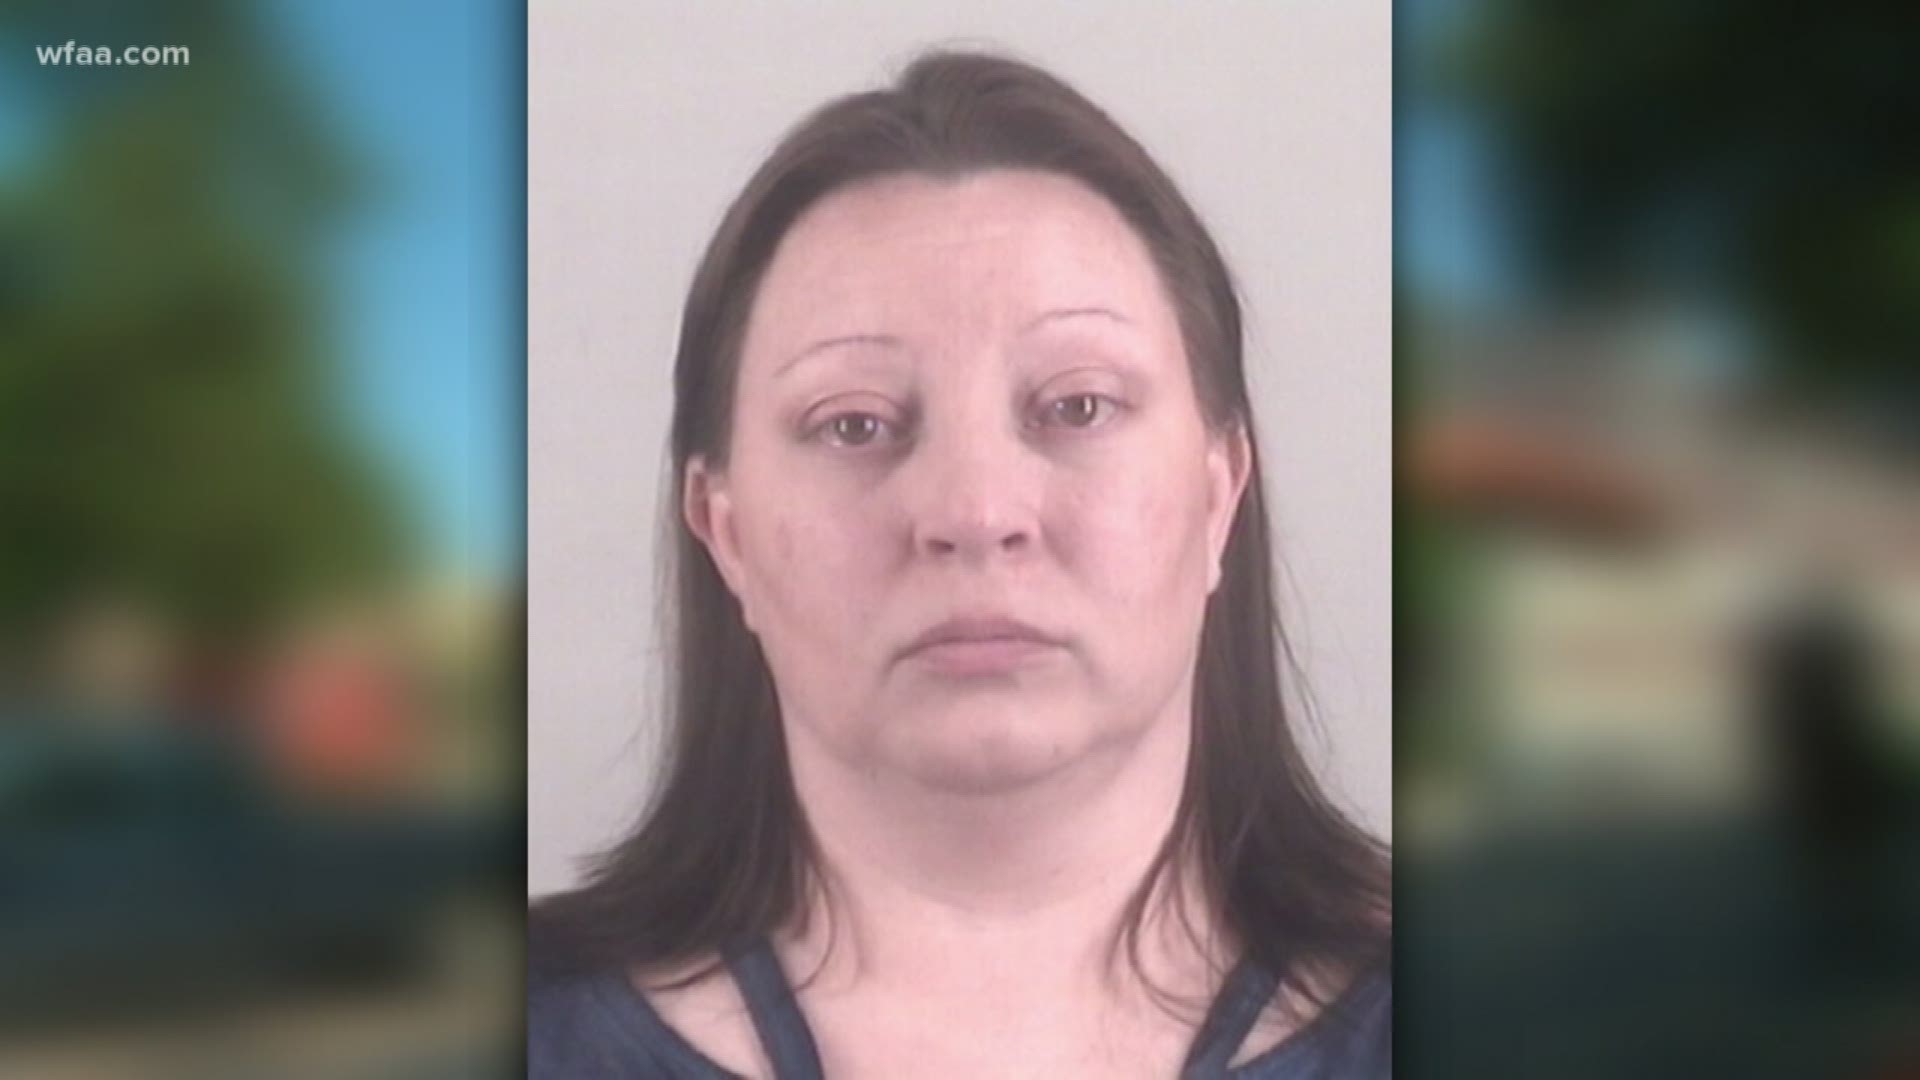 She went from a trusted employee to being accused of stealing $1.3 million.